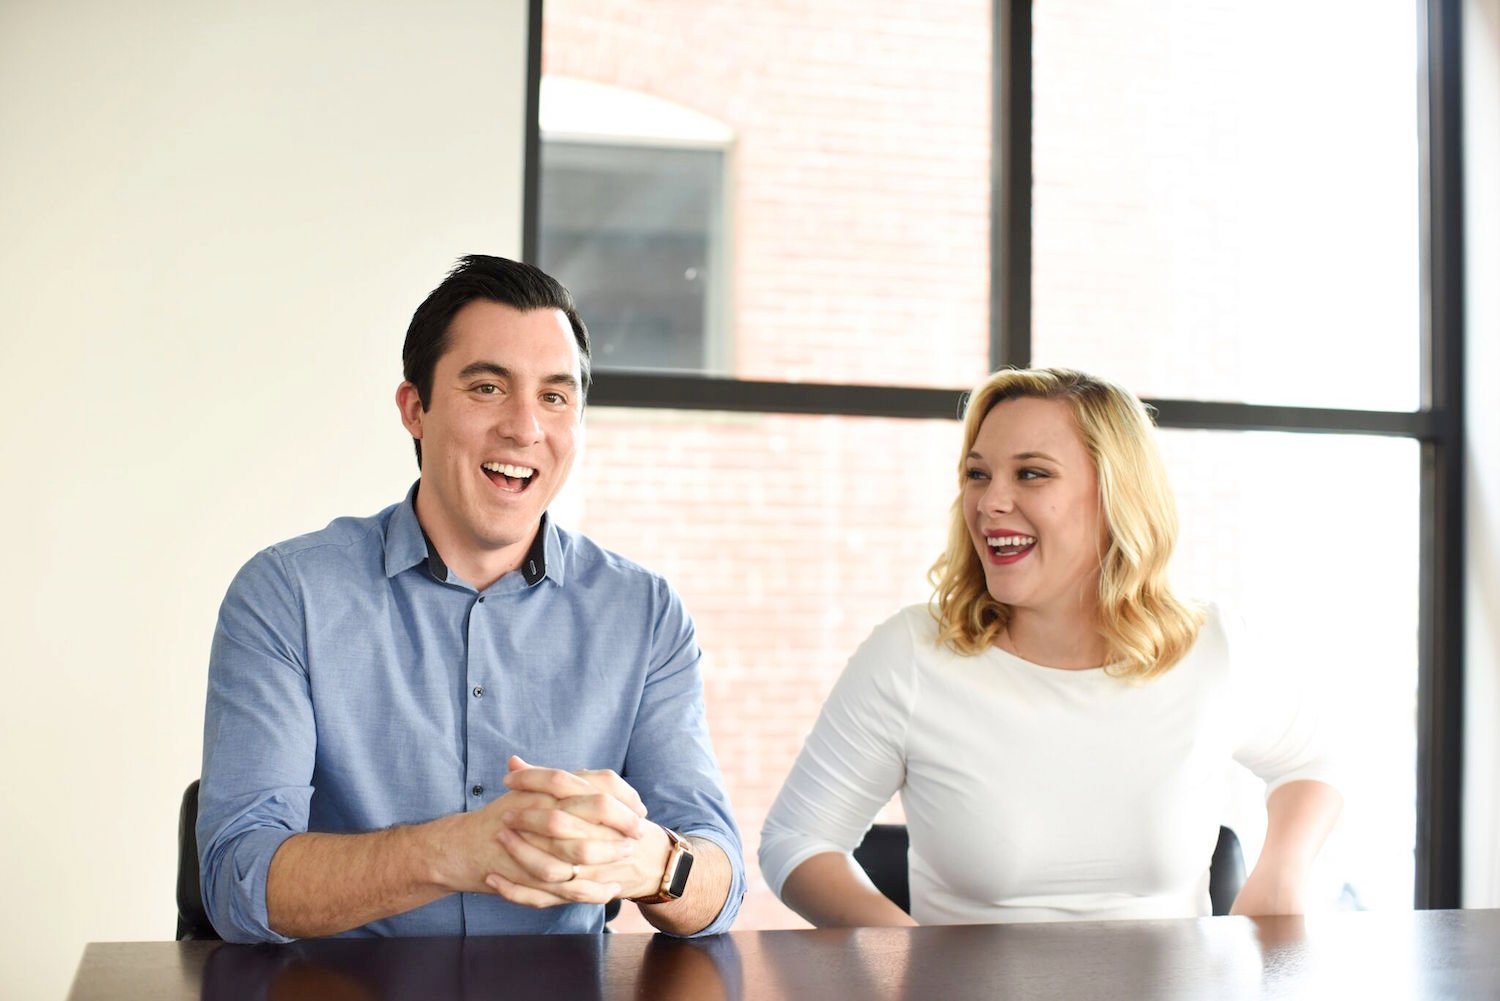 Growth hacking Charleston's Tech Ecosystem This Millennial Couple